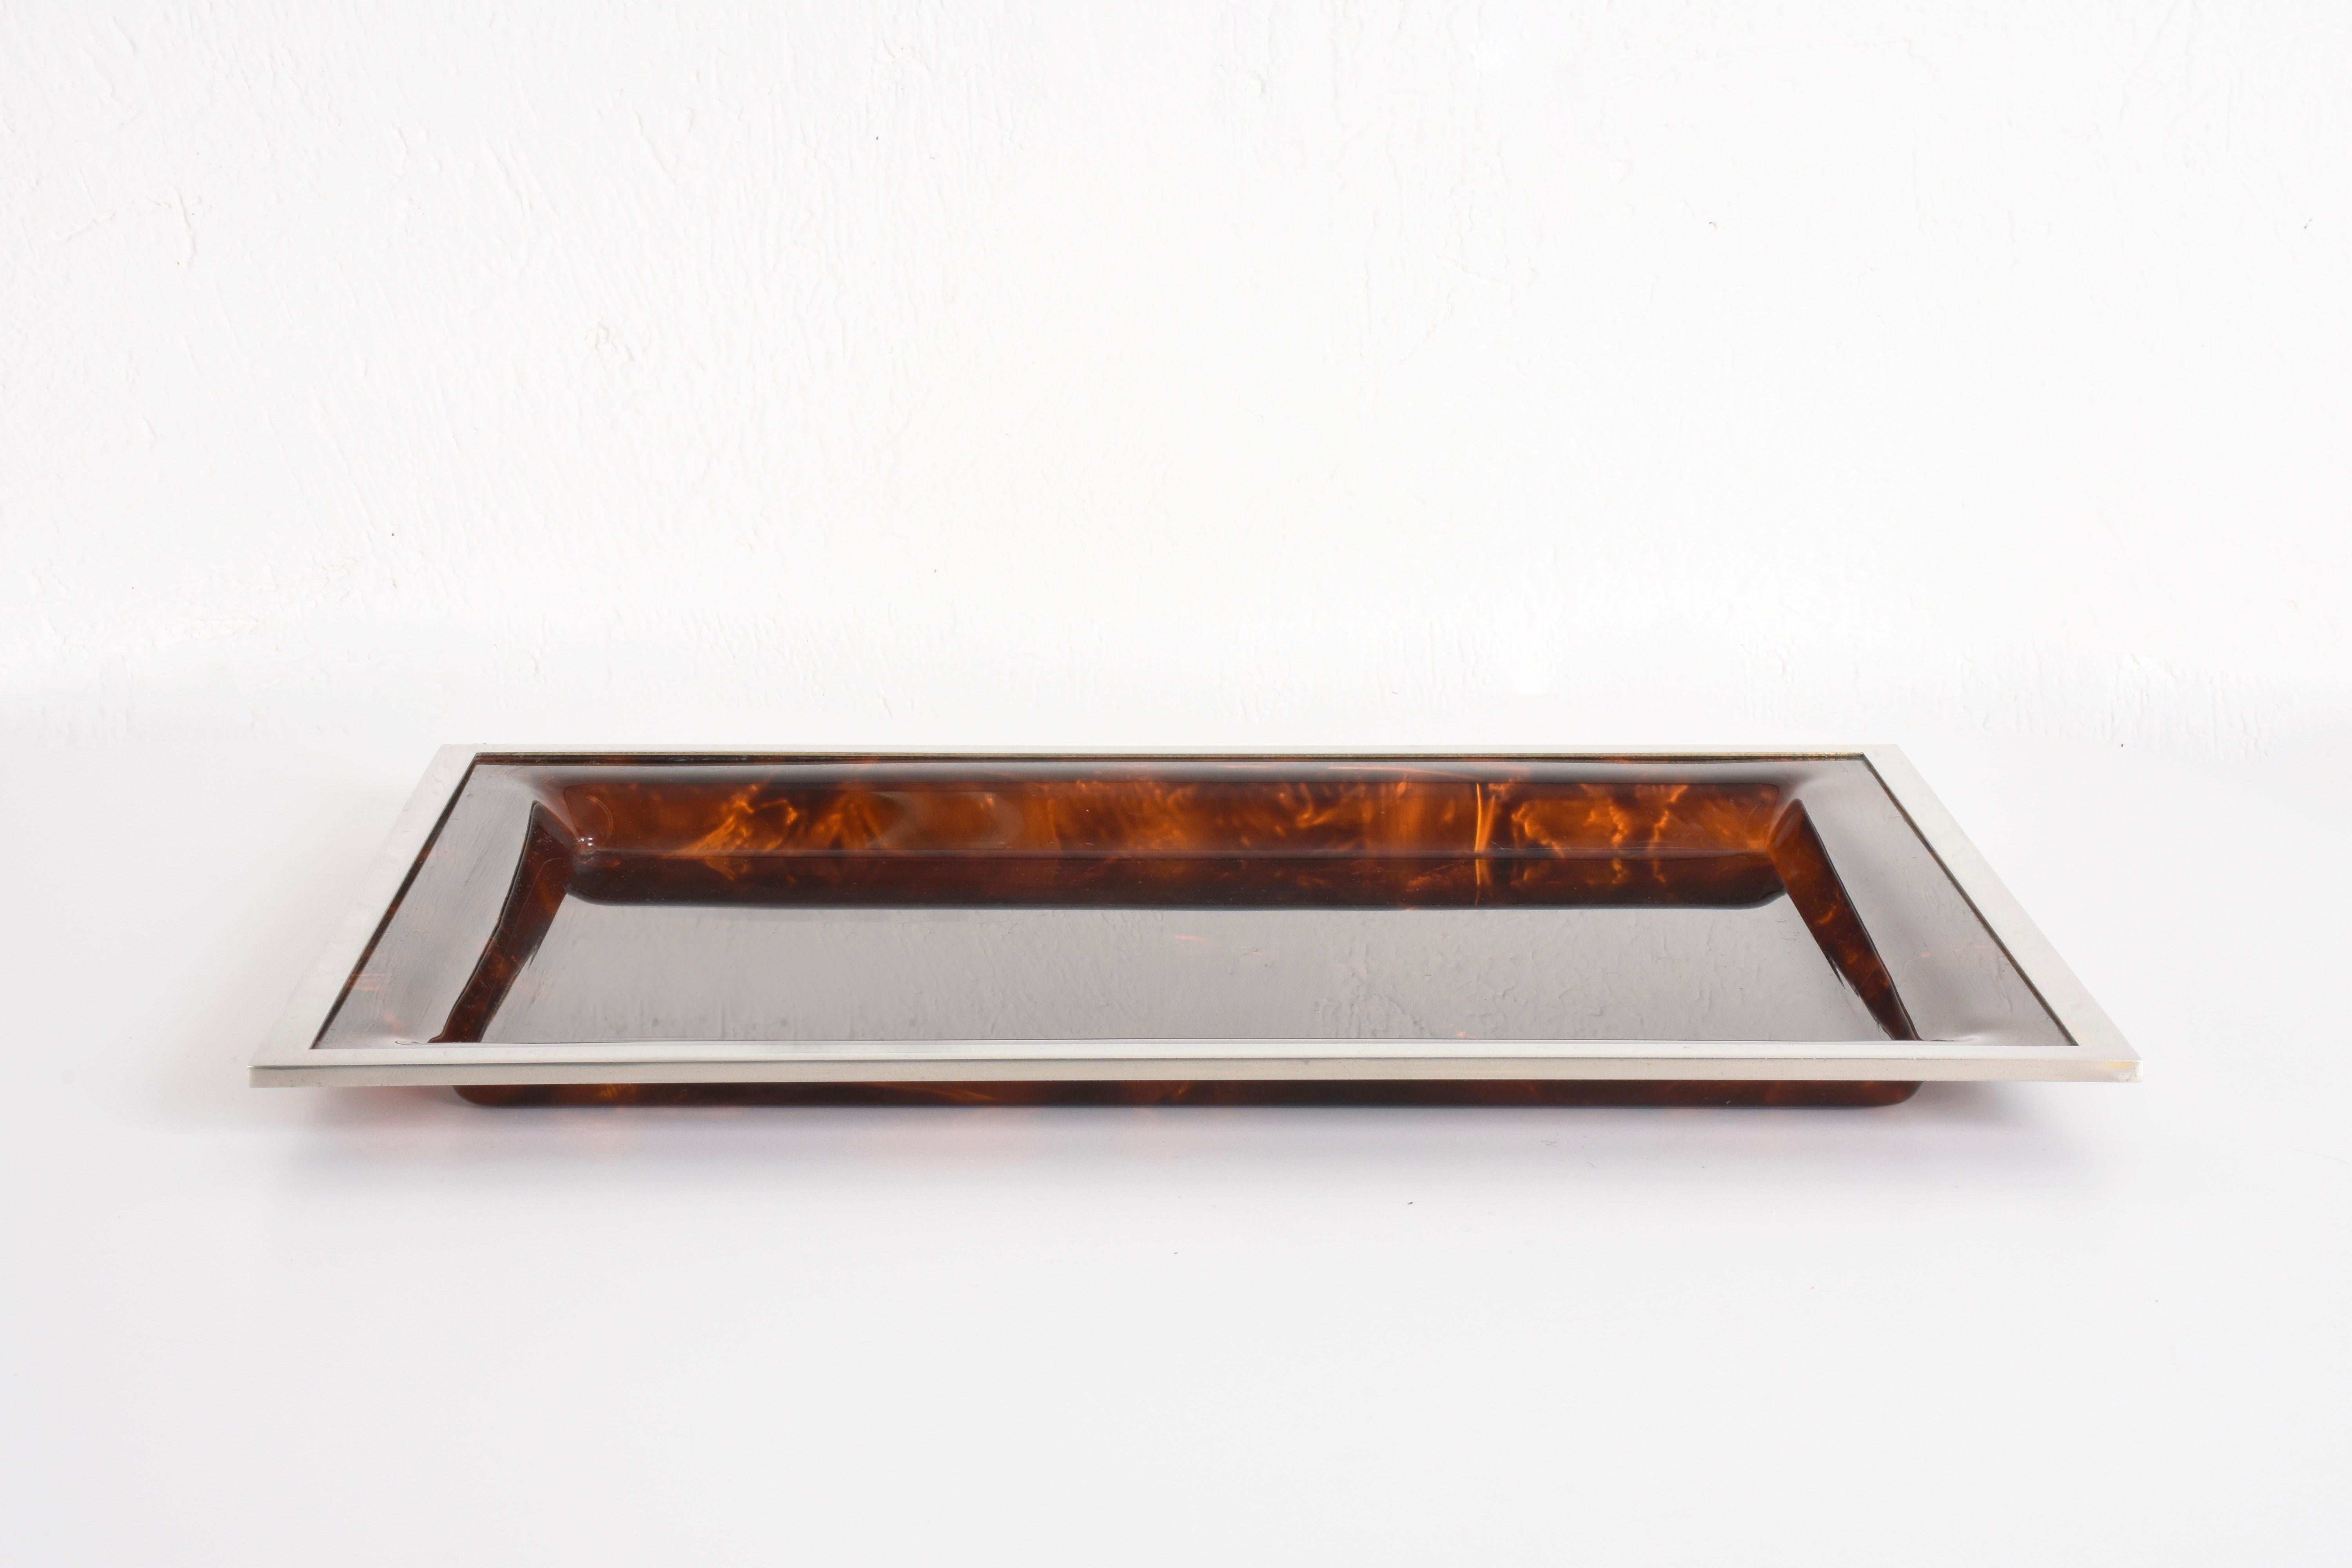 Mid-Century Modern Midcentury Tortoiseshell and Lucite Italian Serving Tray after Willy Rizzo 1970s